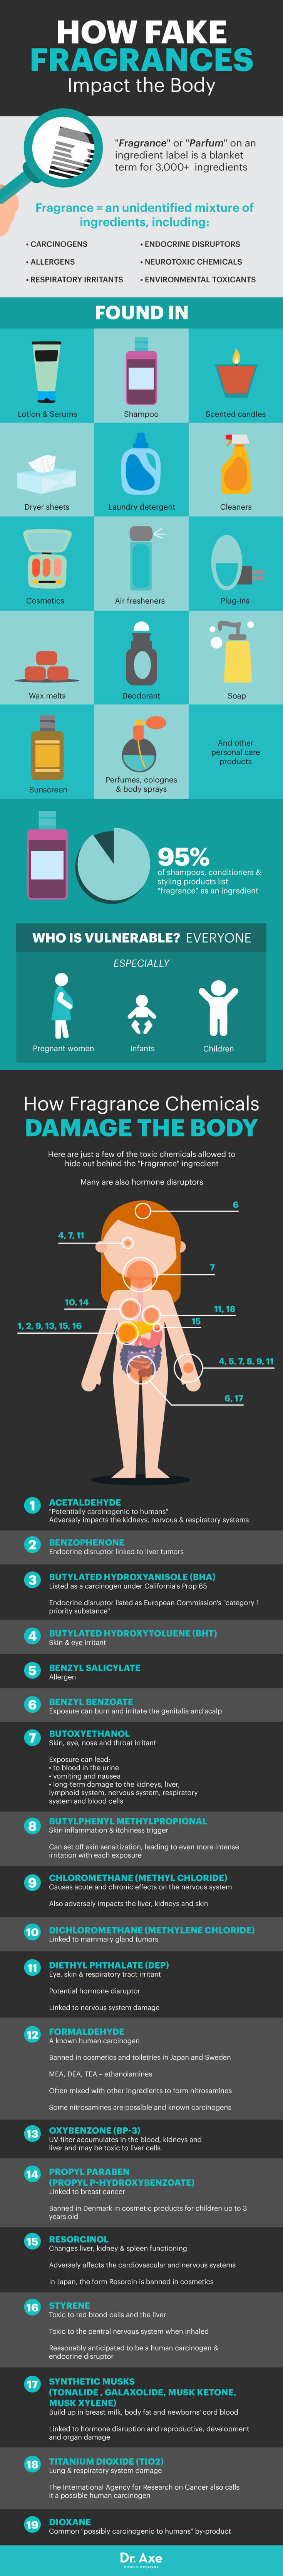 The Shocking Truth Behind “Fragrance” In The Products You Use Infographic